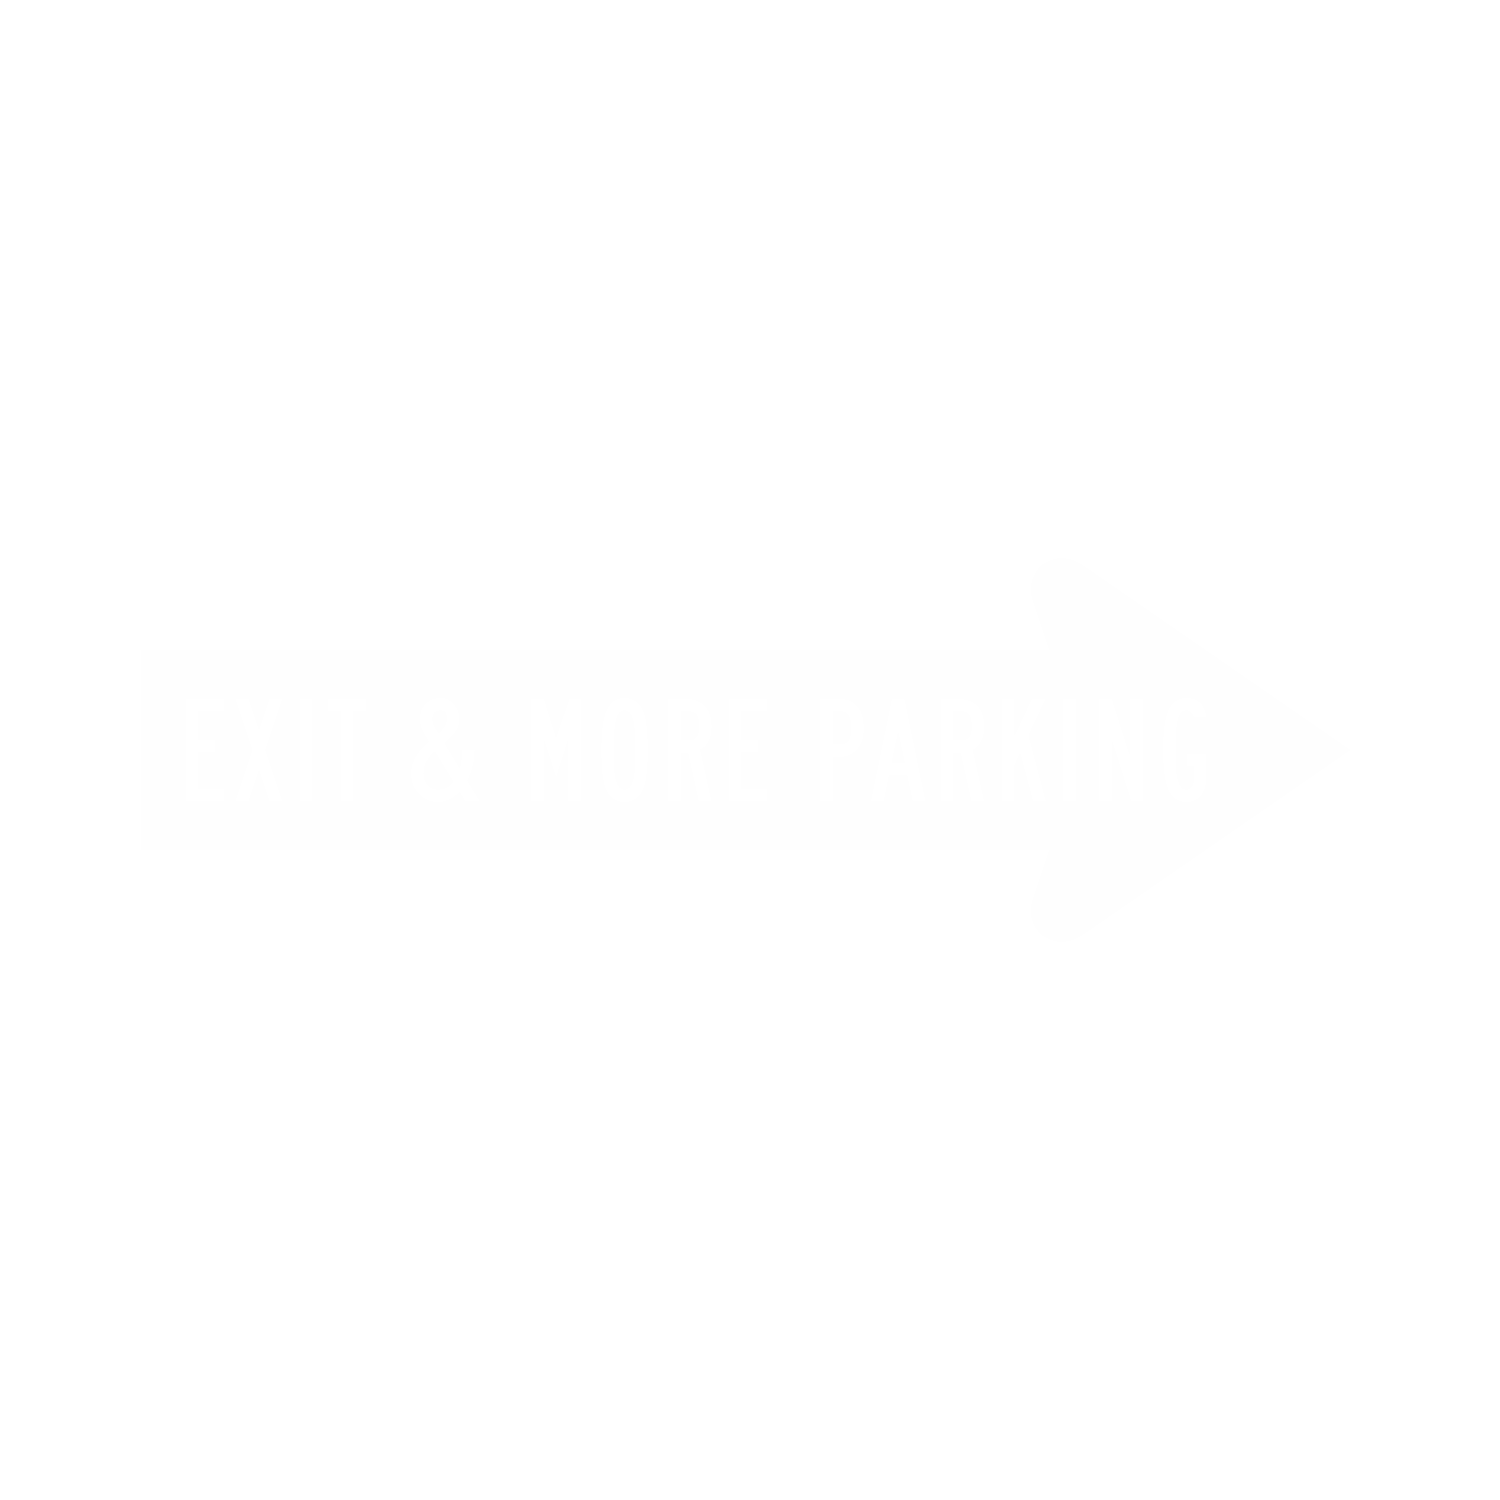 Exit & More Parking Directional Sign